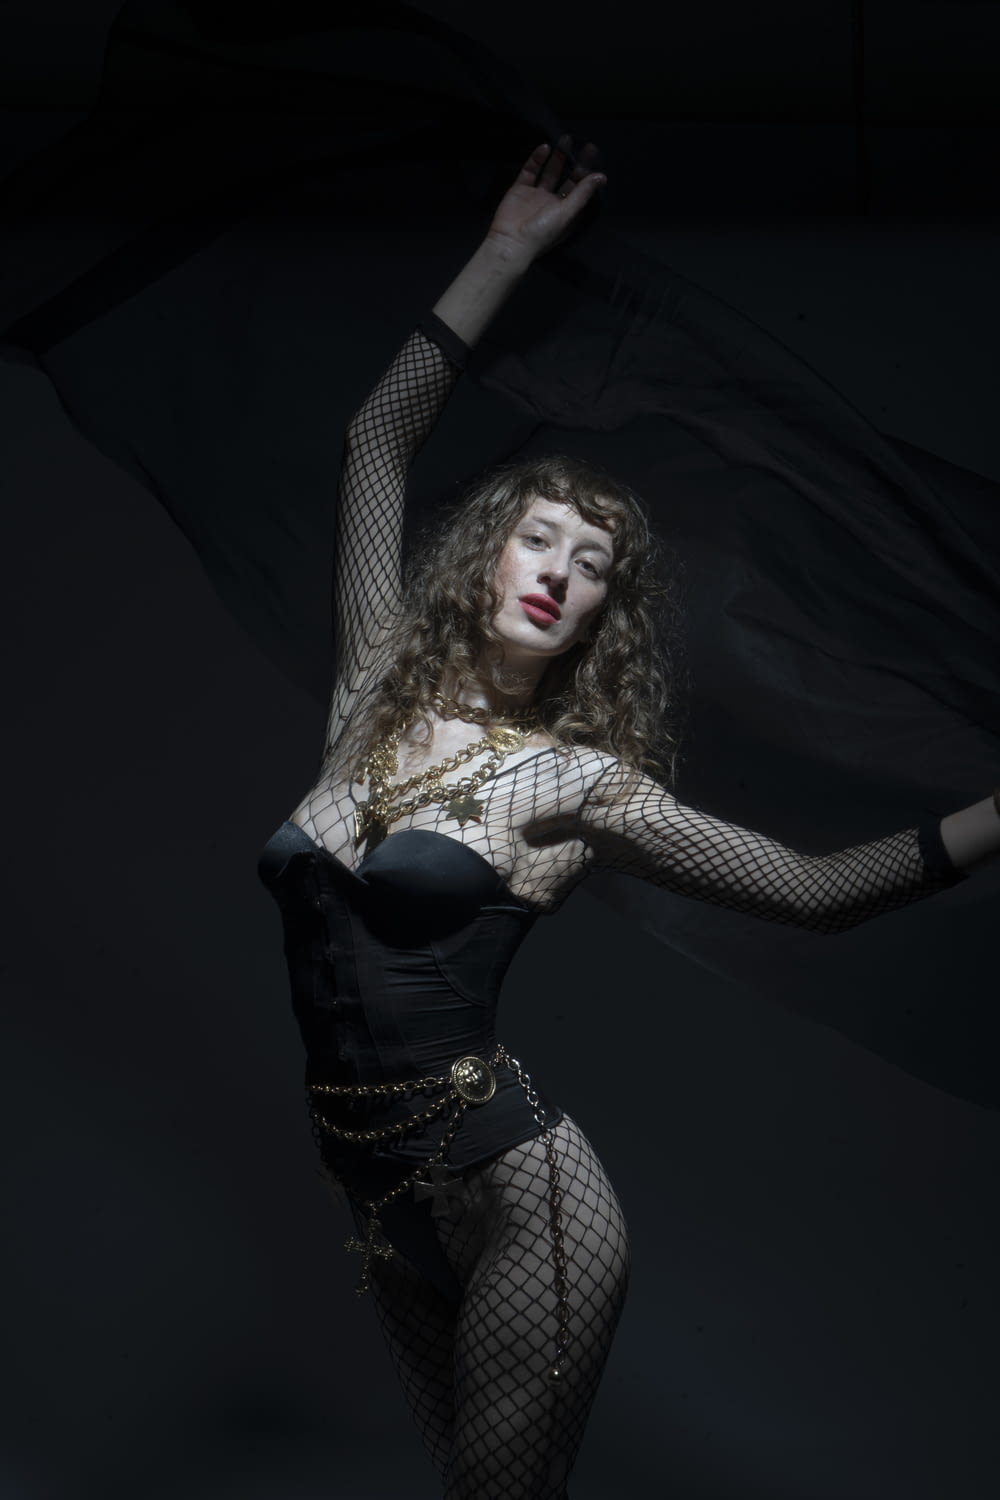 a woman in a fishnet bodysuit and fishnet stockings